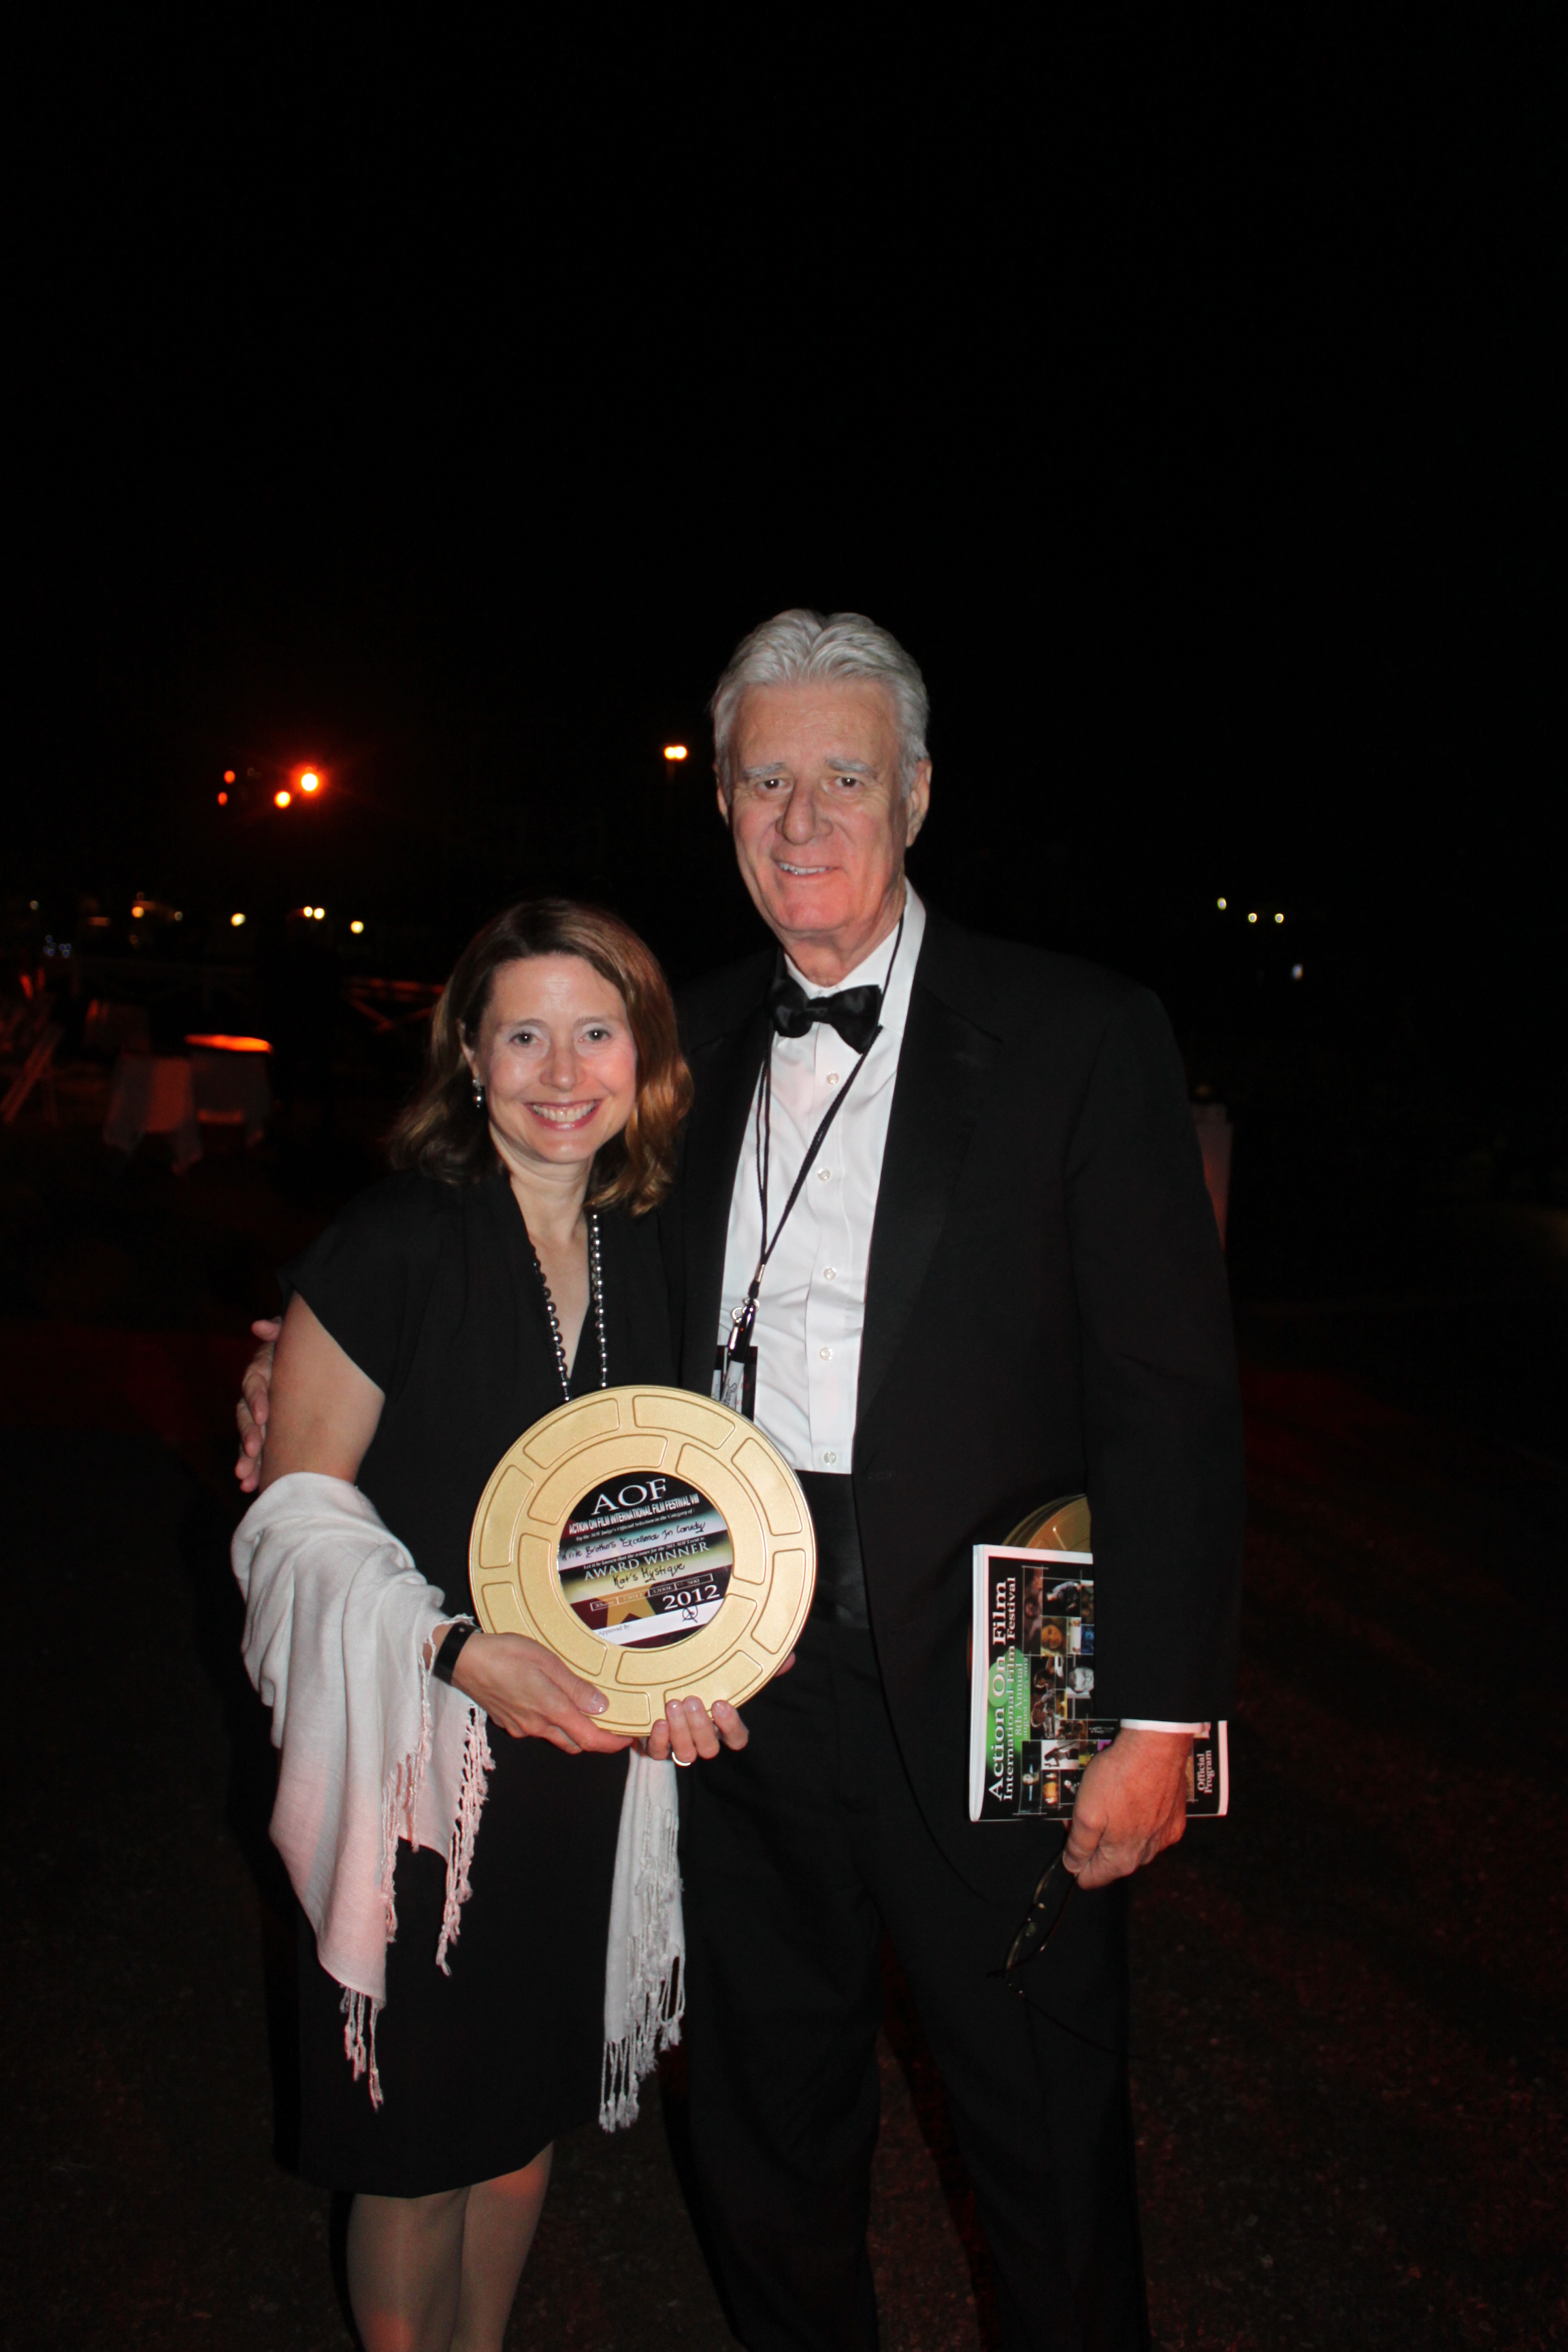 Colleen with Lyman Ward at the AOF Black Tie Event. Colleen won the 